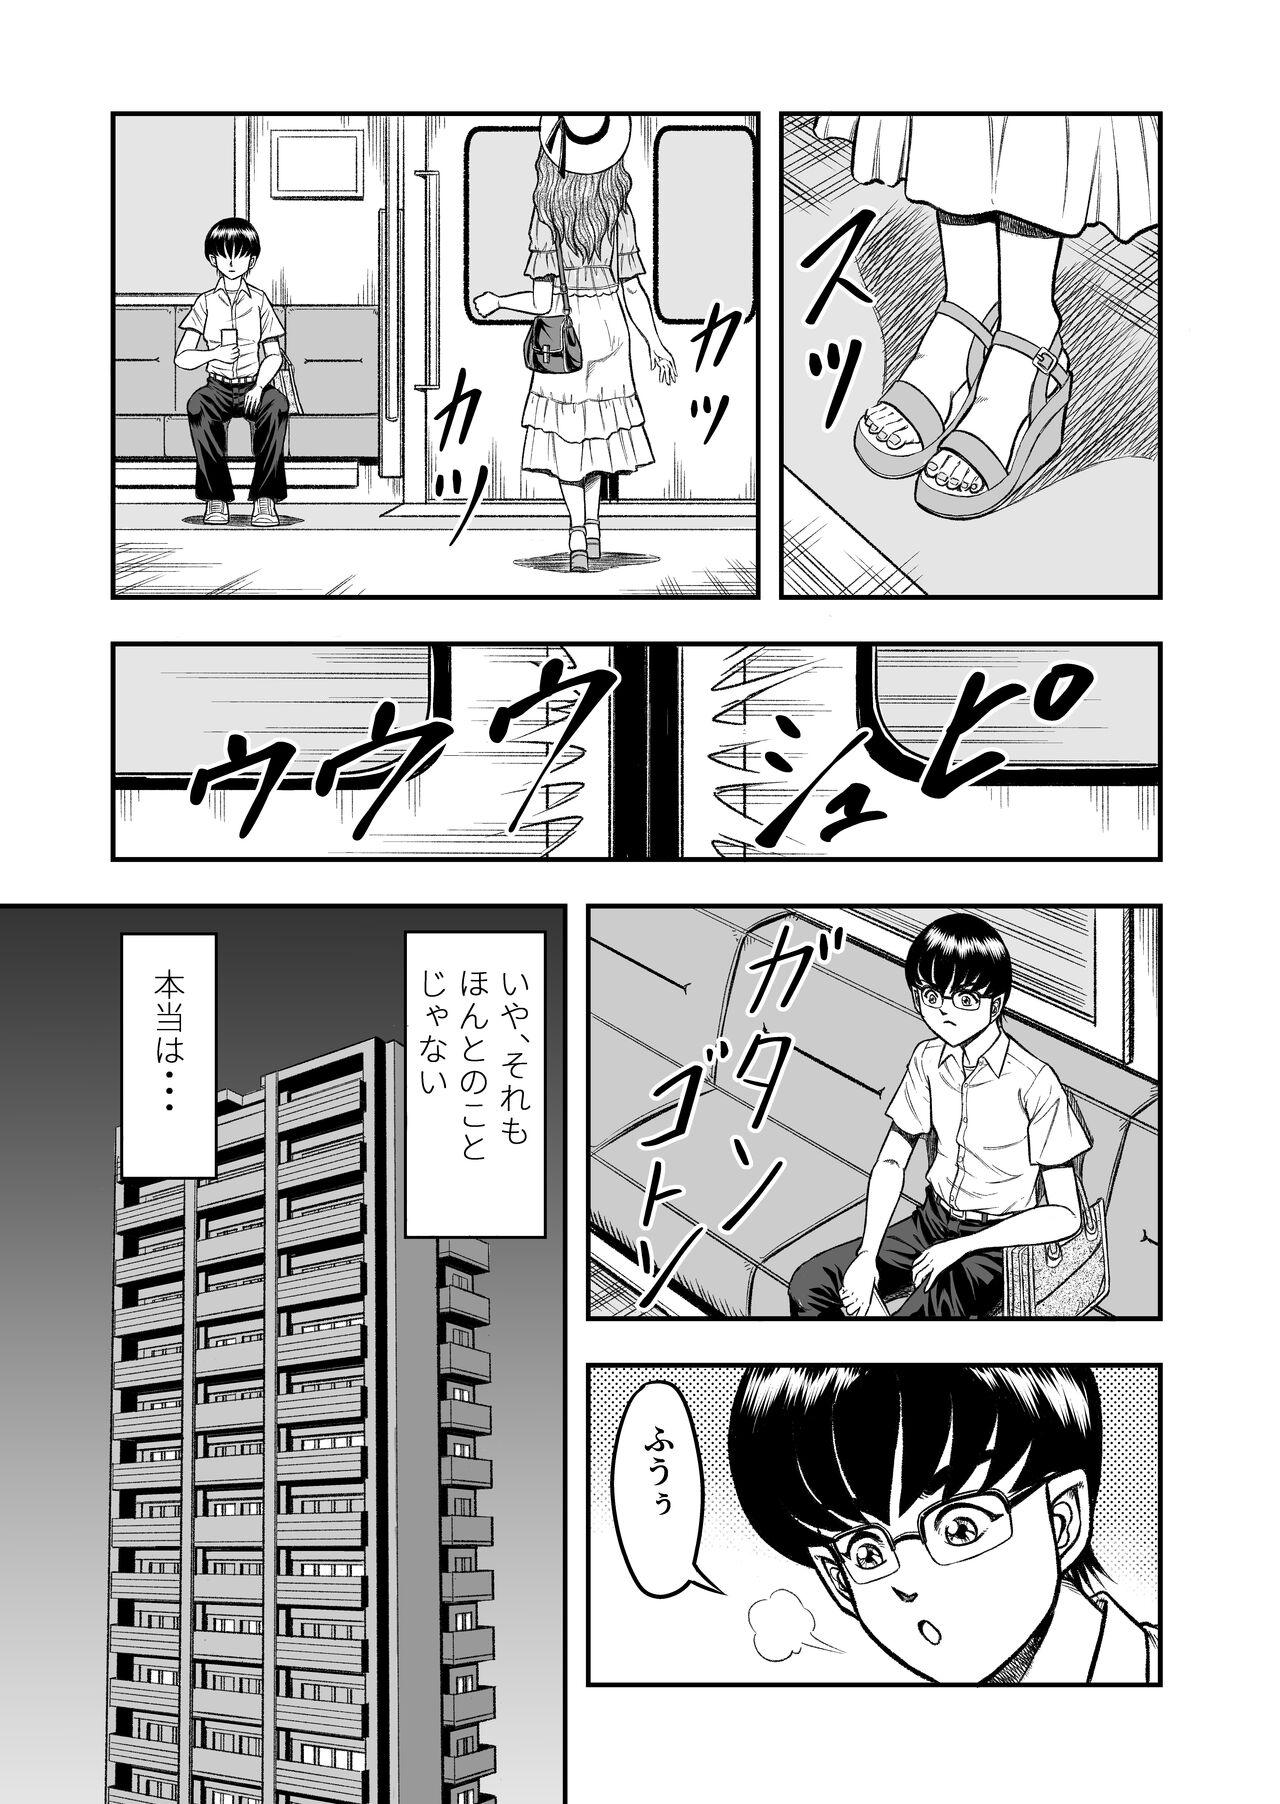 Lingerie OwnWillボクがアタシになったとき 総集編 - Original Stepfamily - Page 5